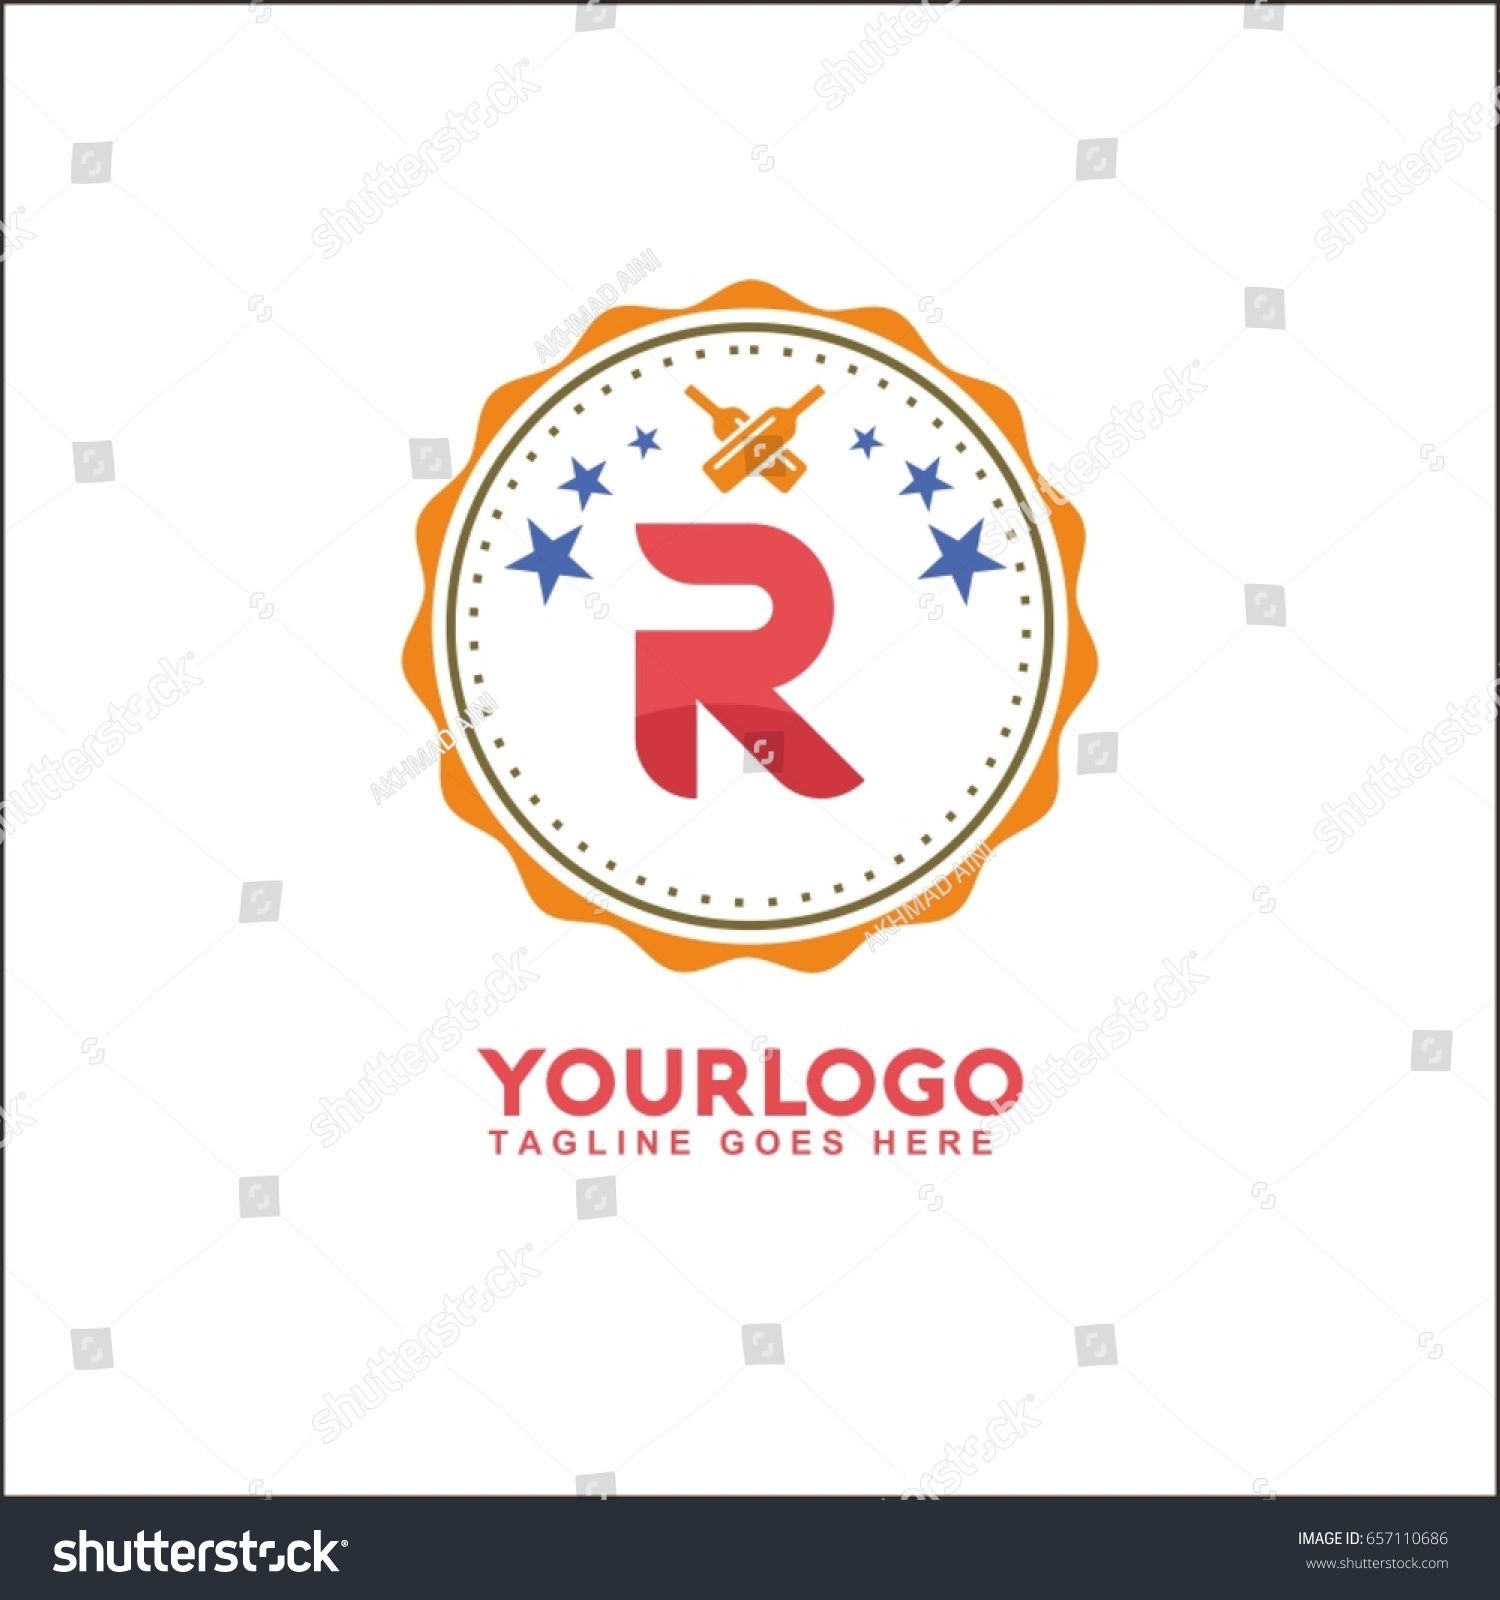 Letter Label Template from image.shutterstock.com